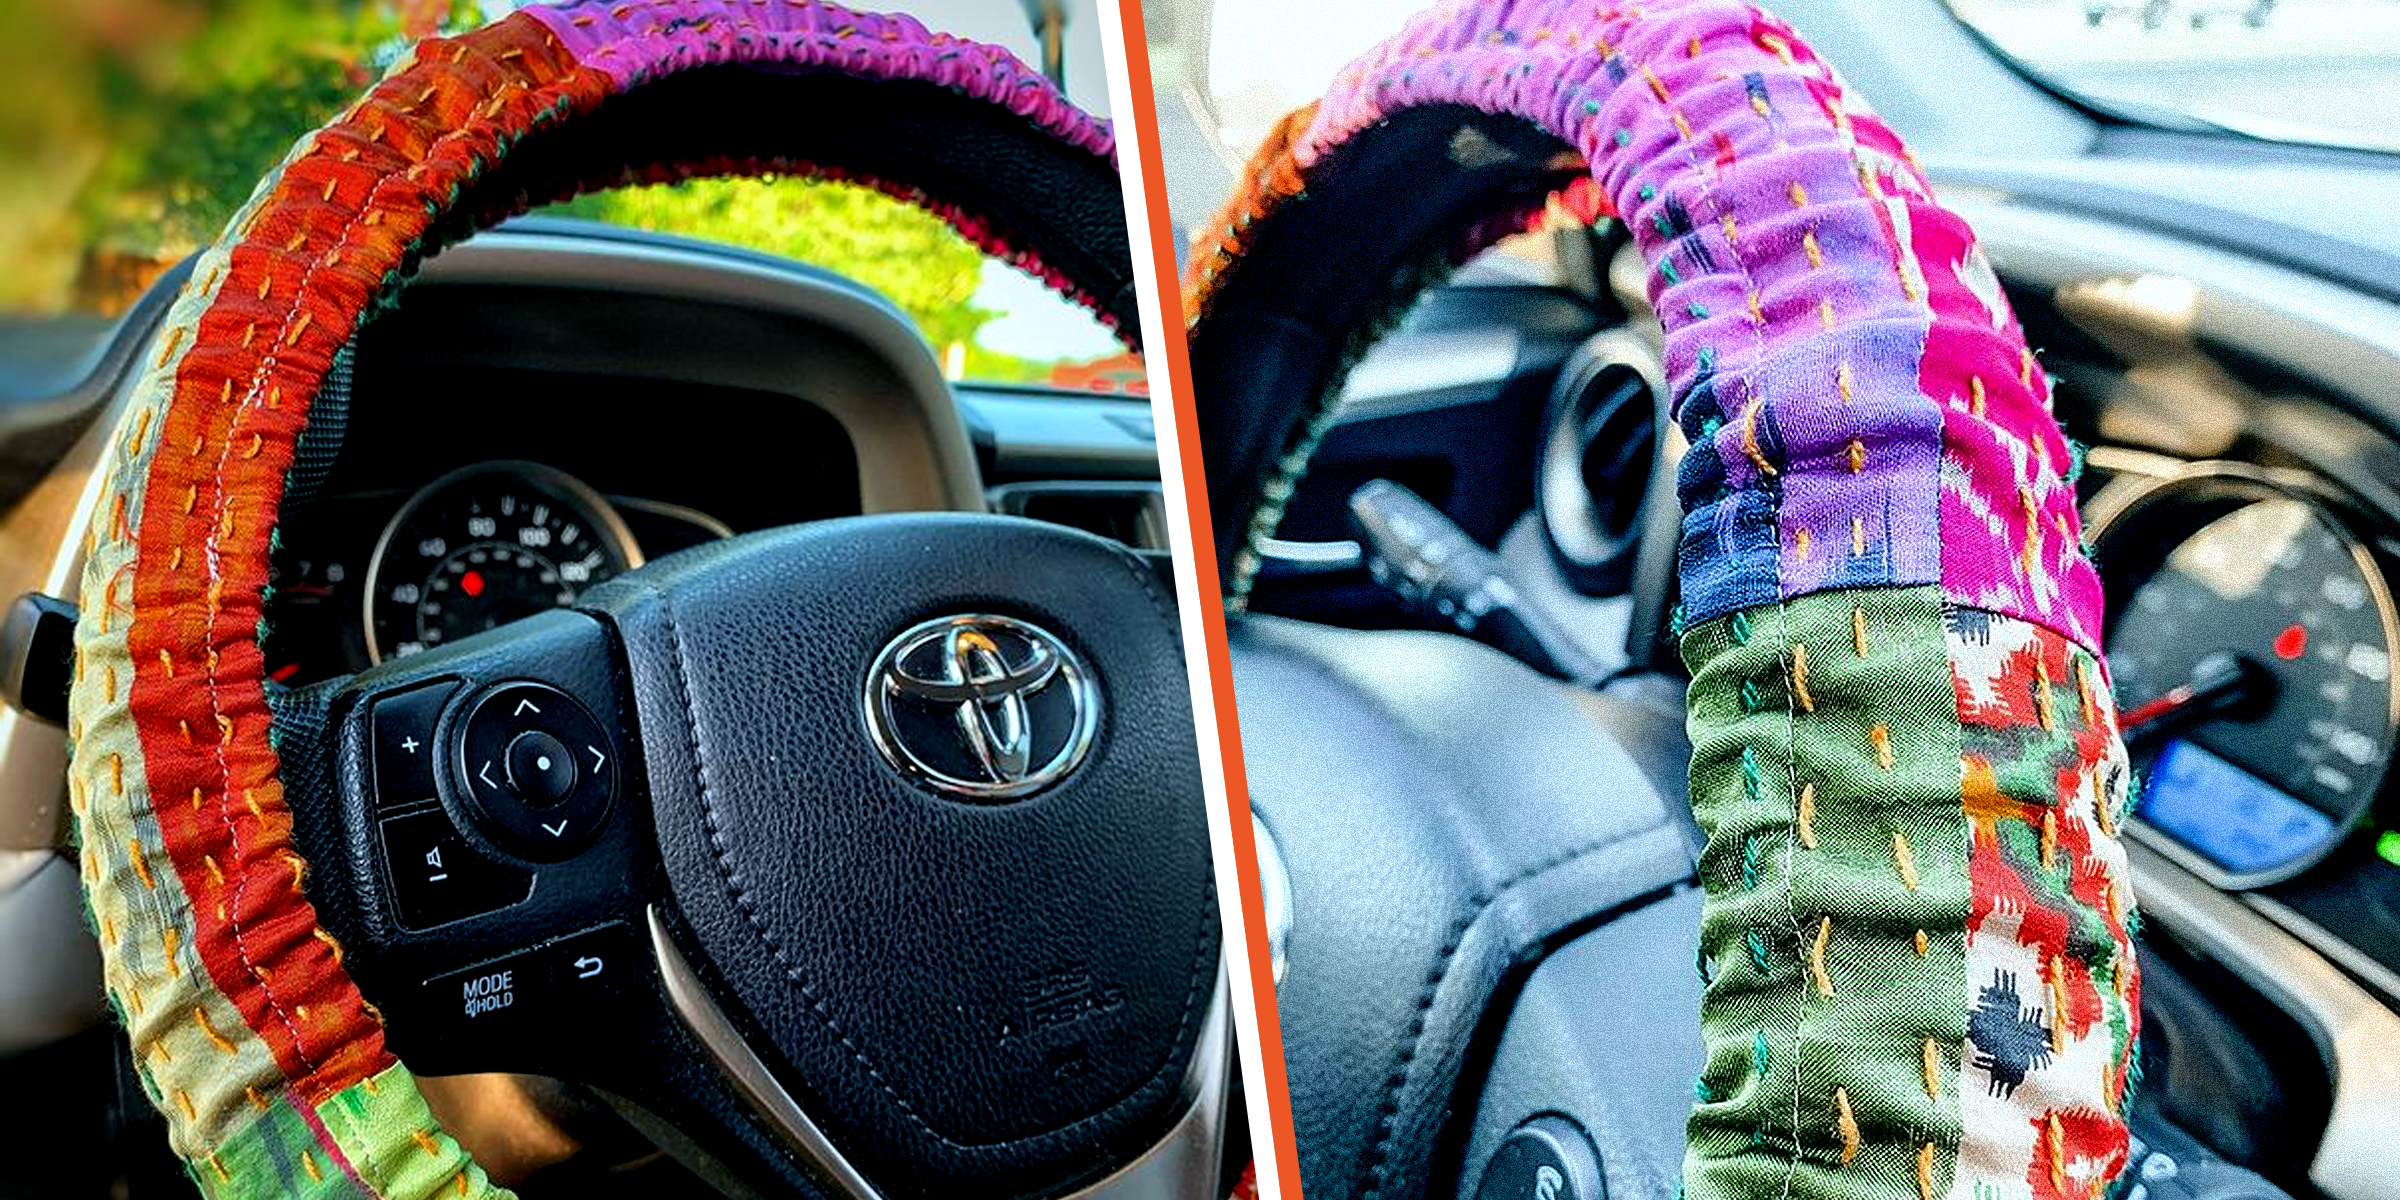 A steering wheel cover | Source: Instagram/the.rustic.bohemian